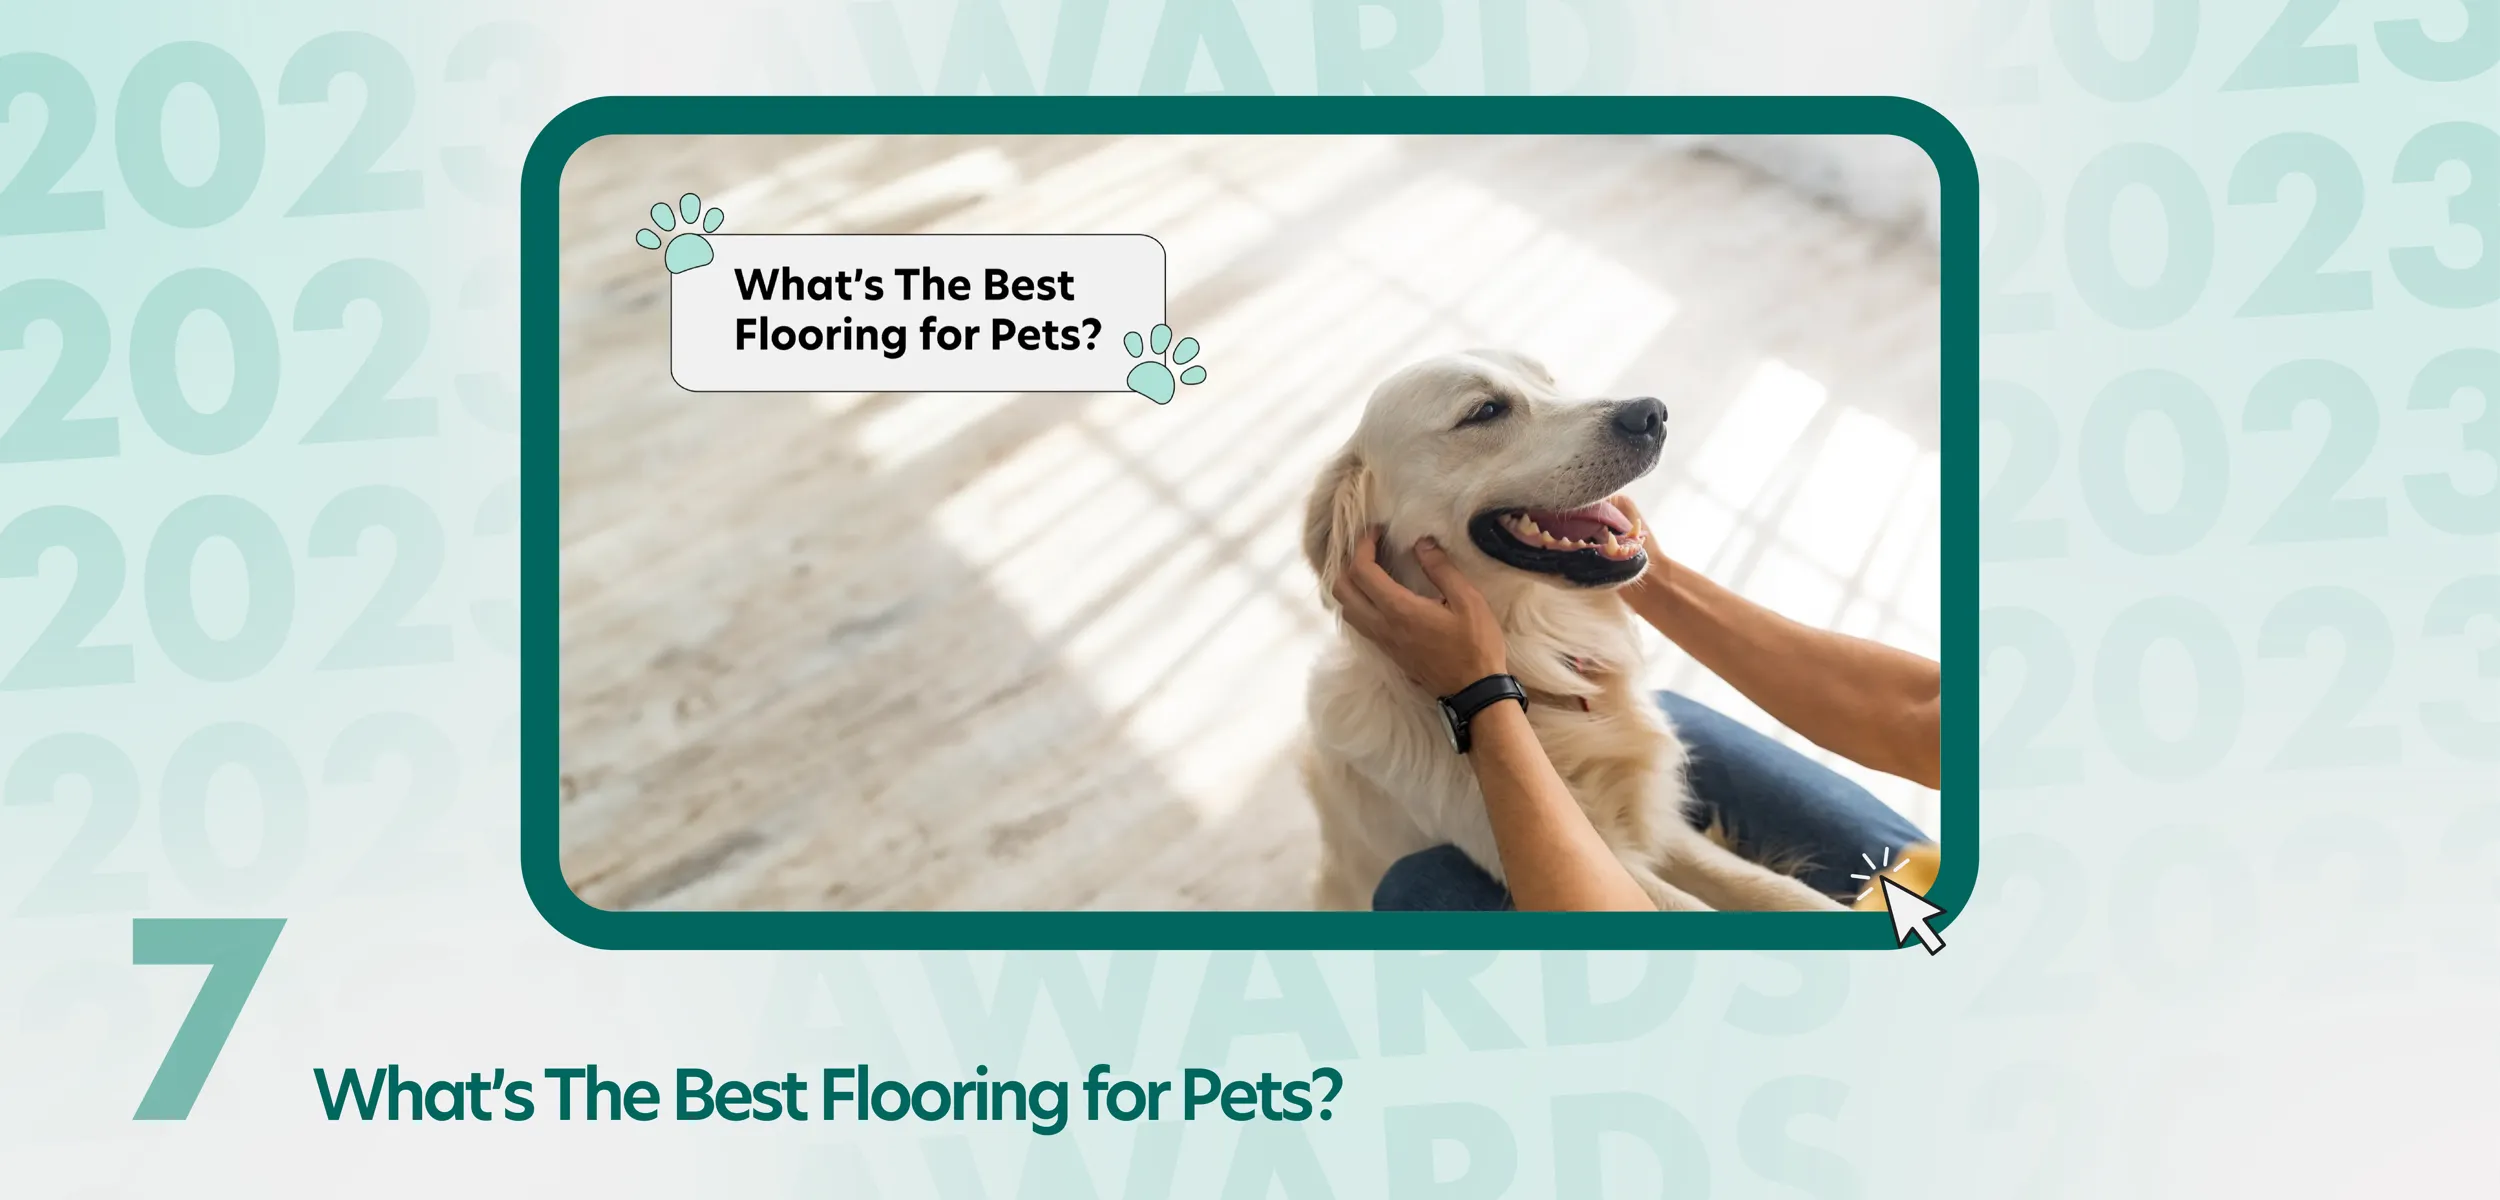 Happy dog with owner on vinyl flooring. Title: What's the Best Flooring for Pets?